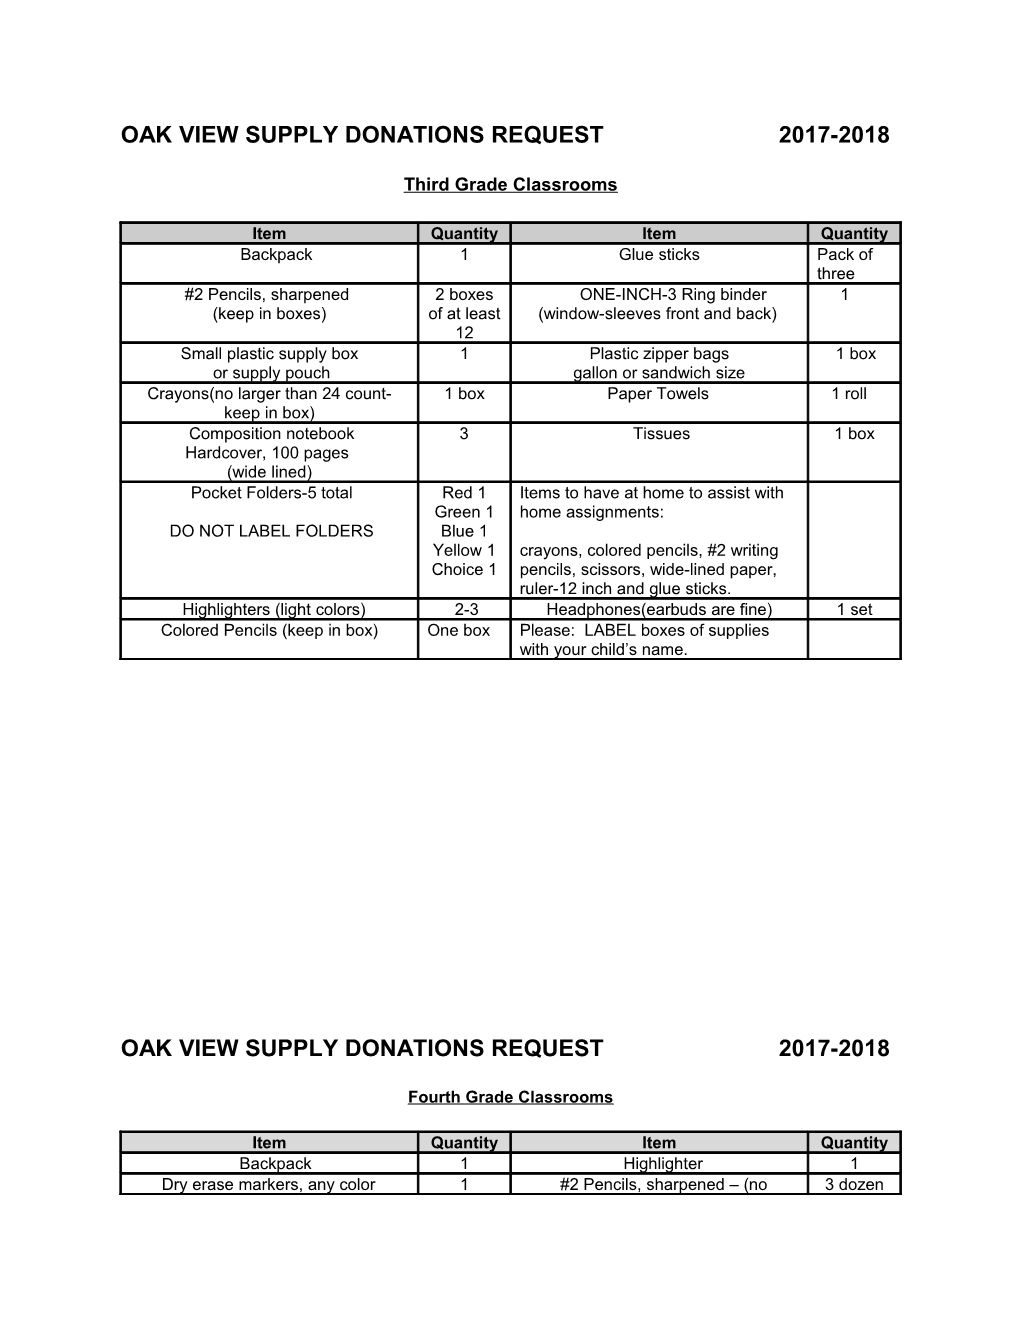 Oak View Supply Donations Request 2017-2018